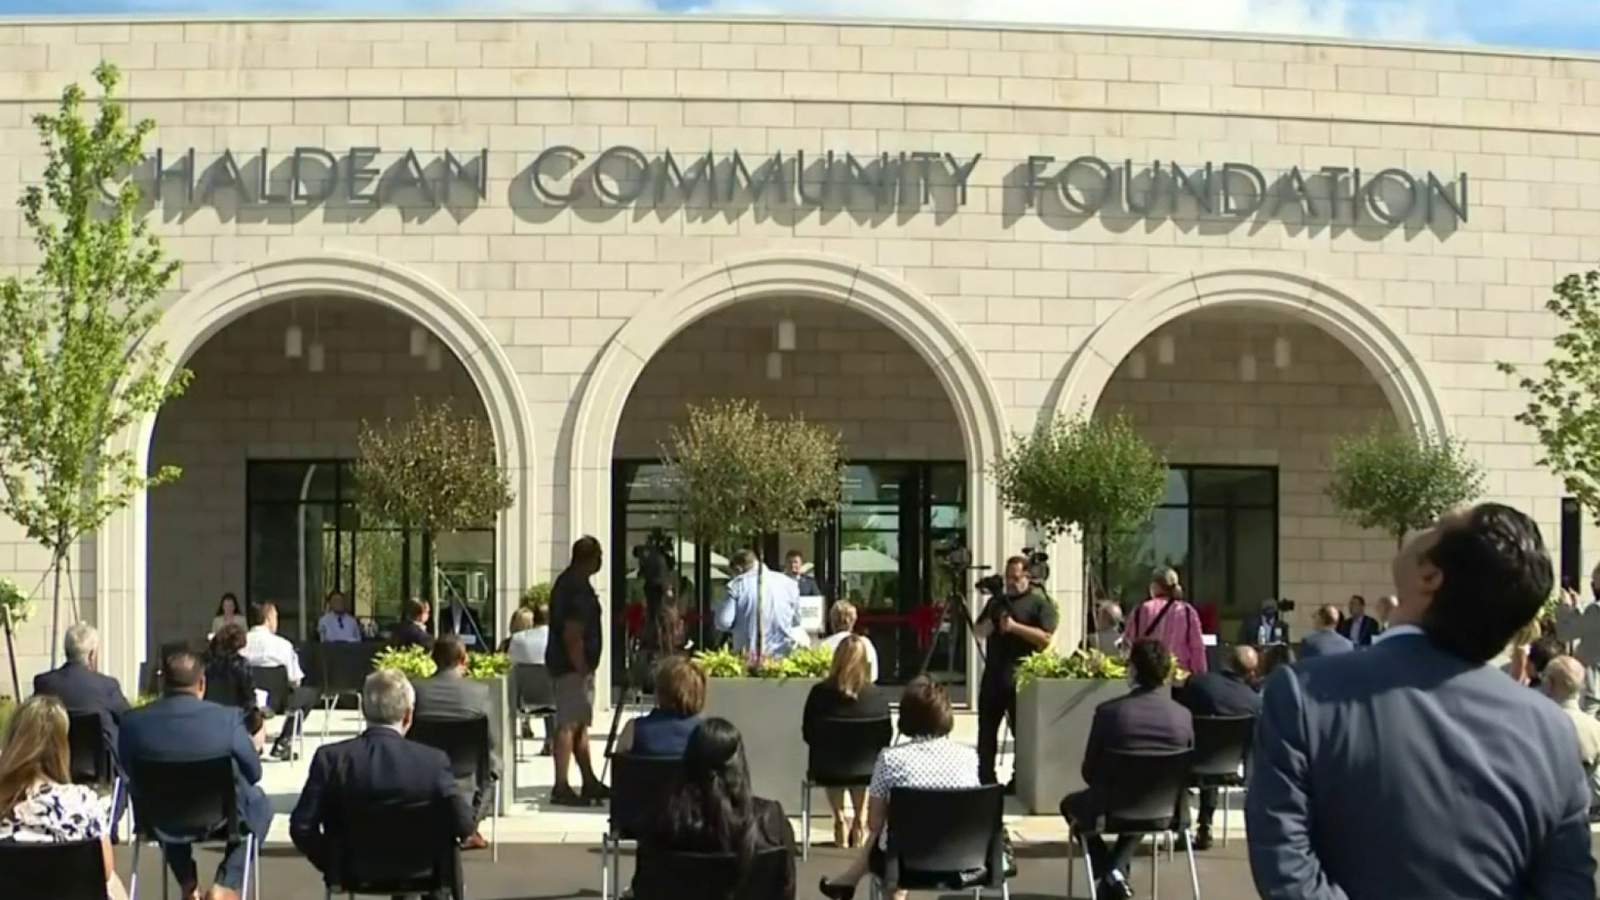 Chaldean Community Foundation unveils new building in Sterling Heights